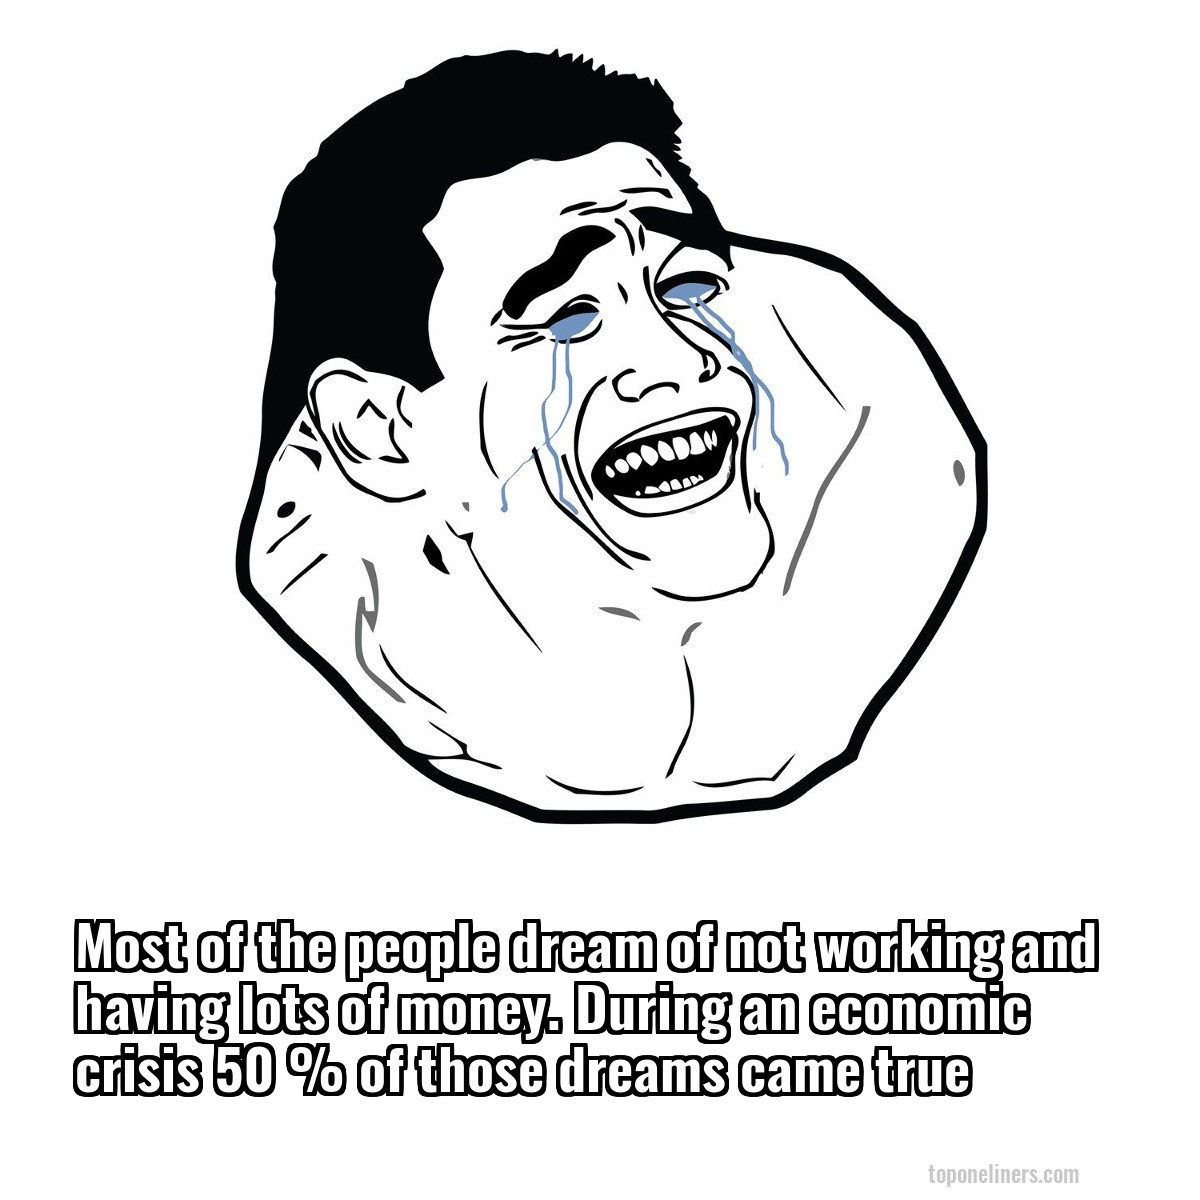 Most of the people dream of not working and having lots of money. During an economic crisis 50 % of those dreams came true
